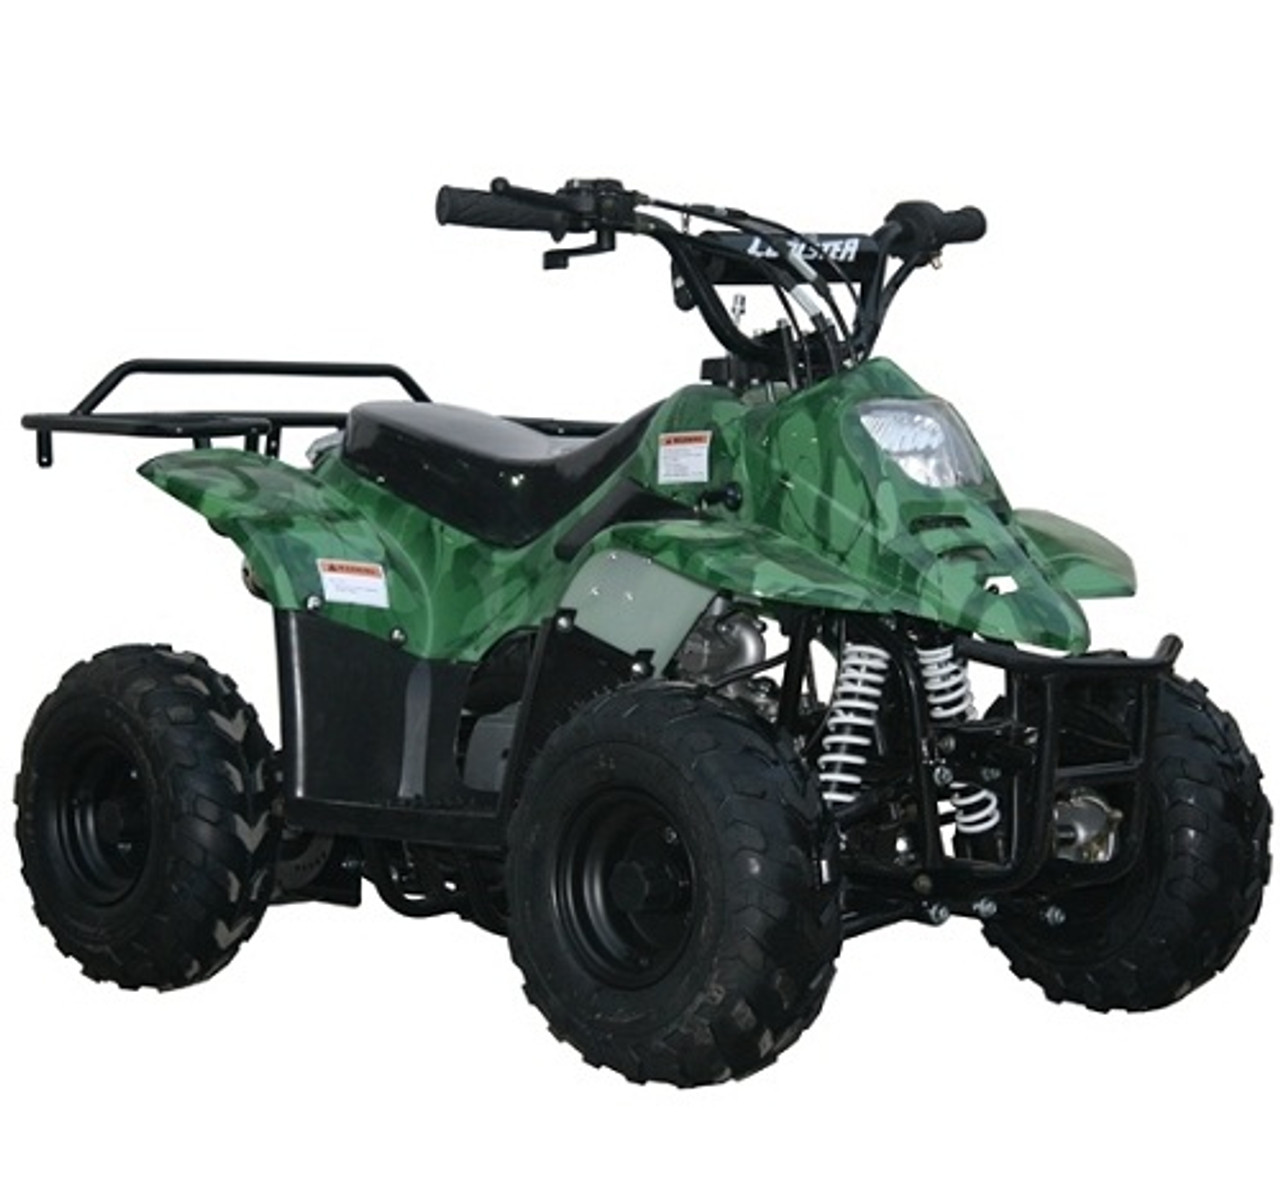 Coolster 3050C-Tumbleweed-Hd Youth Atv, Honda Clone, 110Cc Air Cooled, Single Cylinder, 4-Stroke ATV - Fully Assembled and Tested